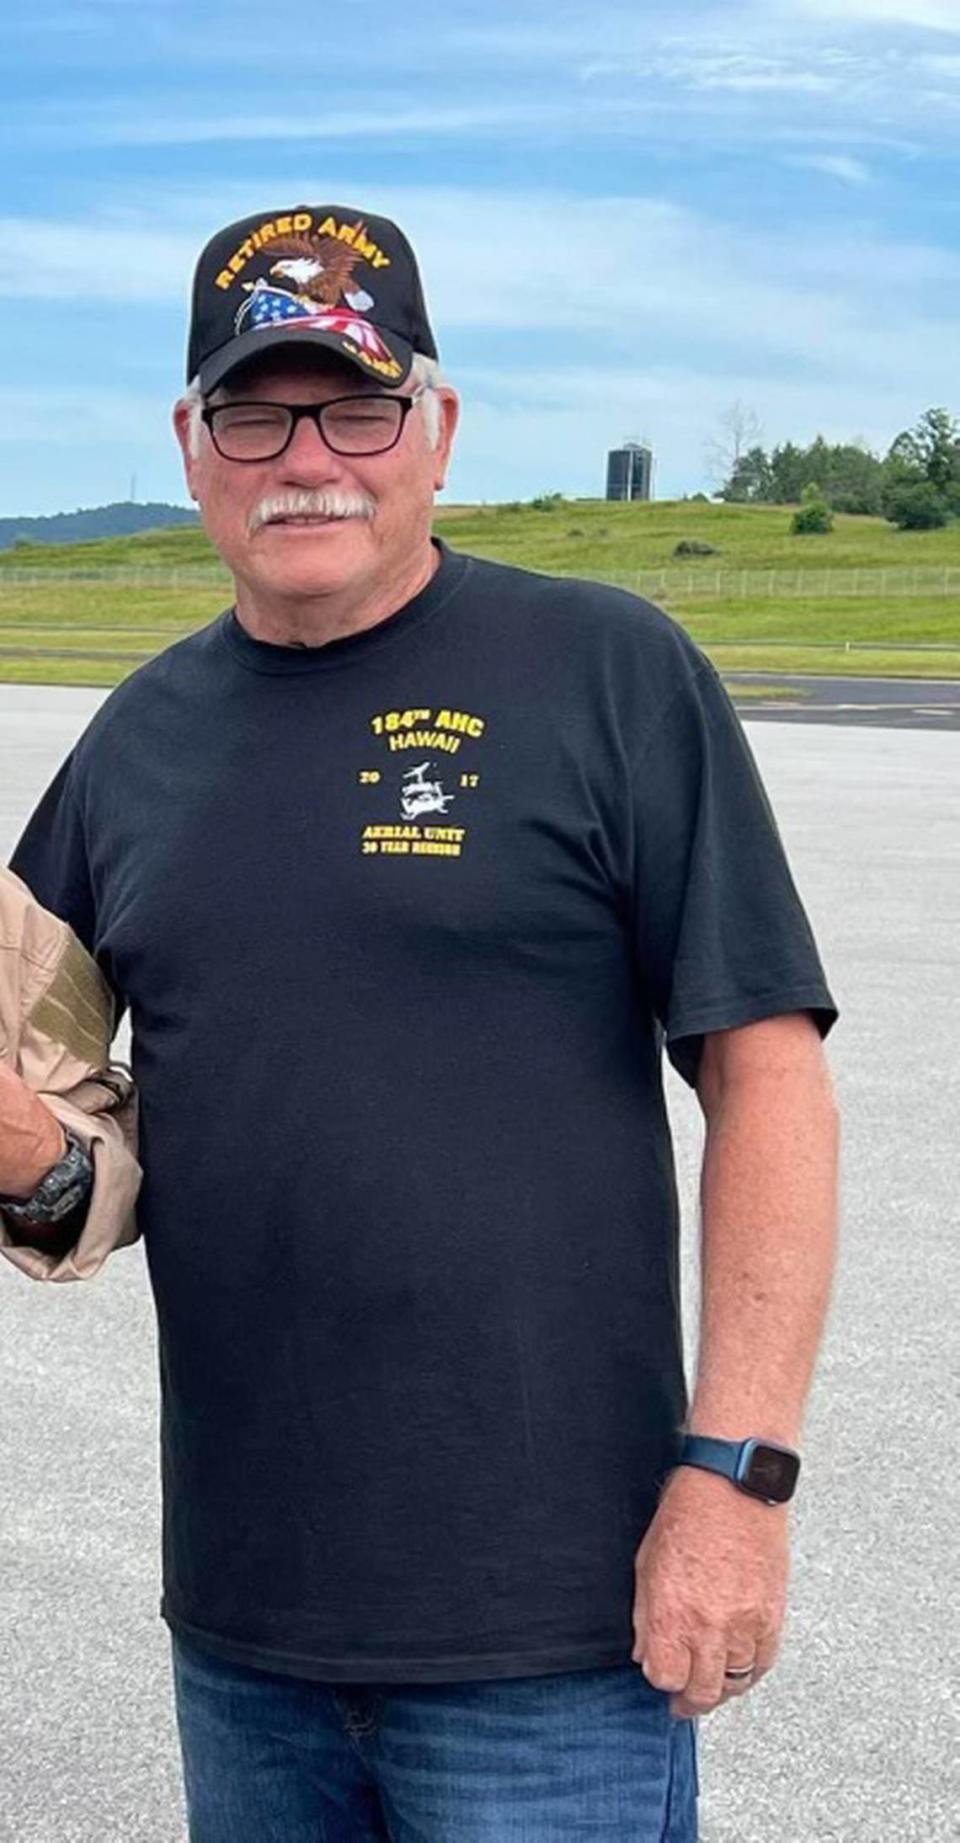 Don Sandhoff, 69, was one of six people killed in a helicopter crash in West Virginia on Wednesday, June 22, 2022.